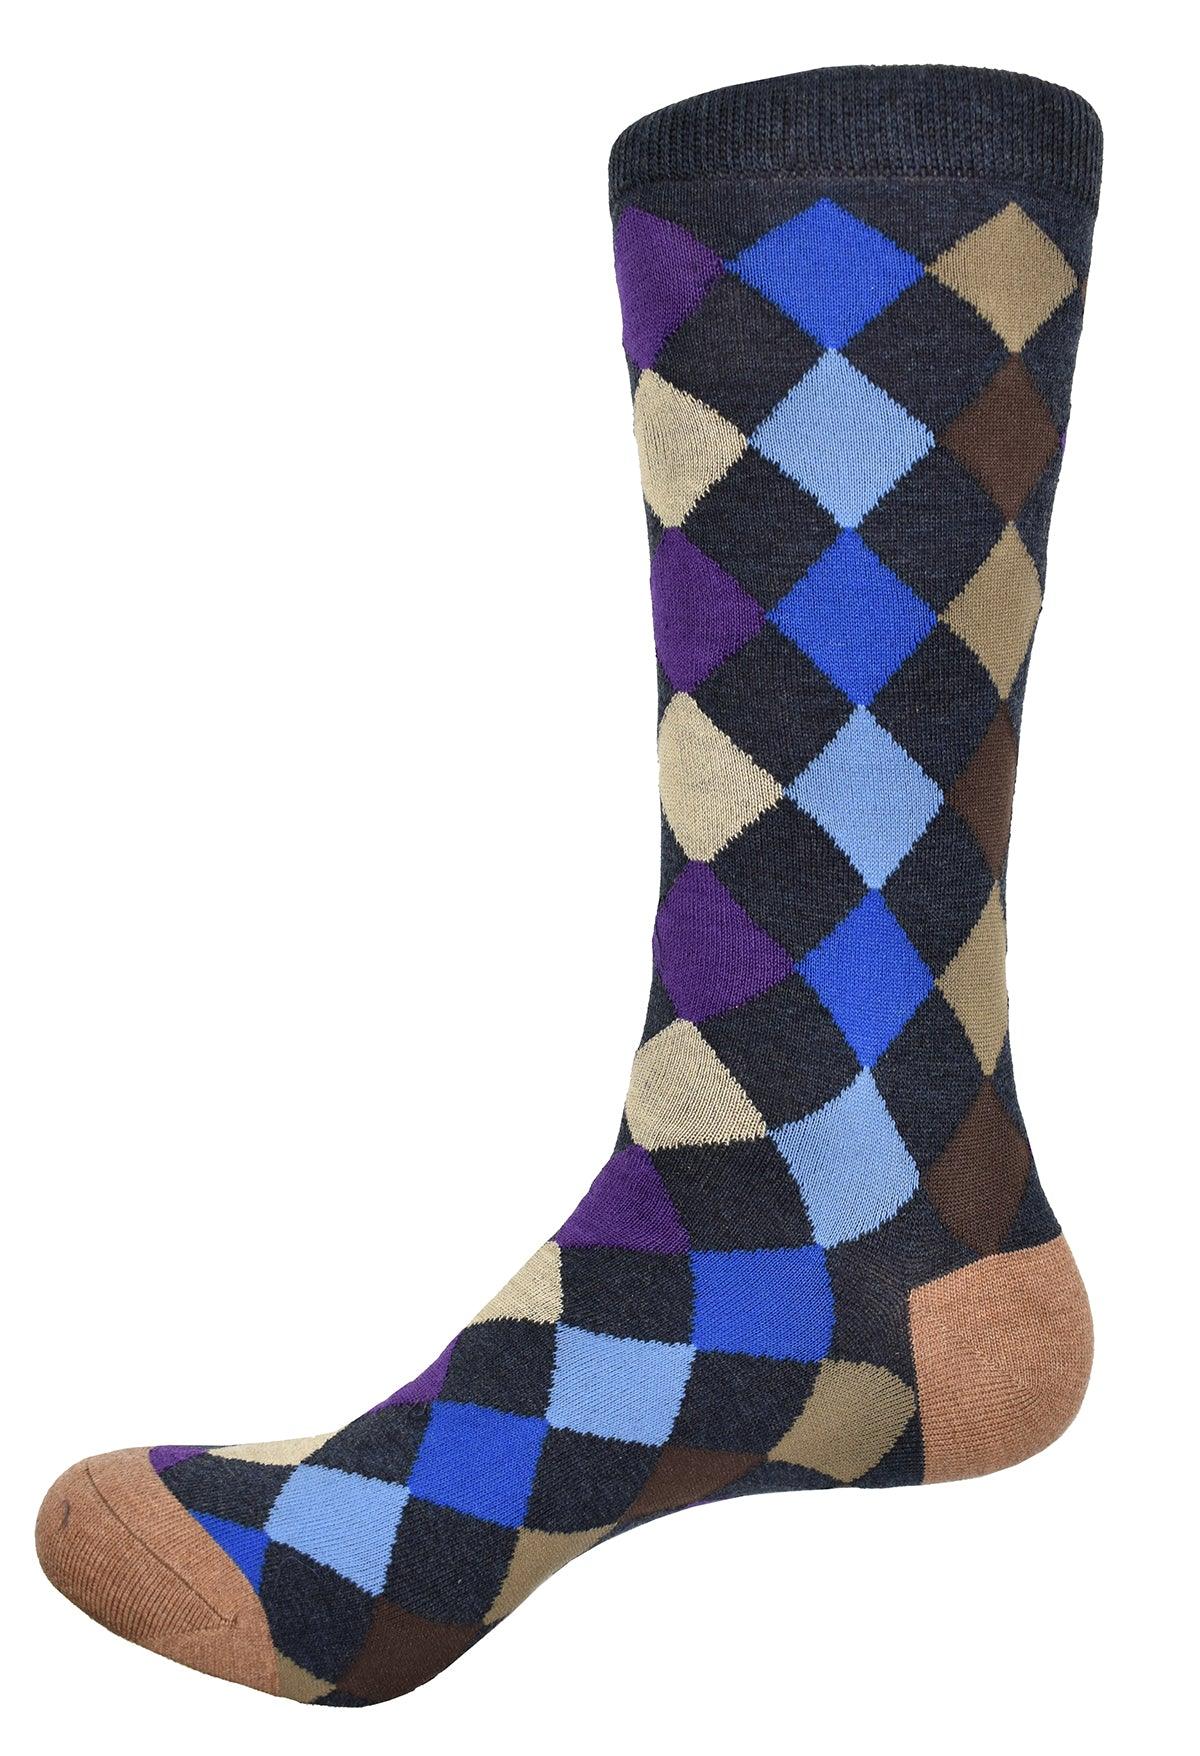 Warm colors in a diamond pattern to work with bottoms in the blue or tan family.  Soft mercerized cotton. Mid calf height. Fits size 9-13  Sock by Marcello Sport